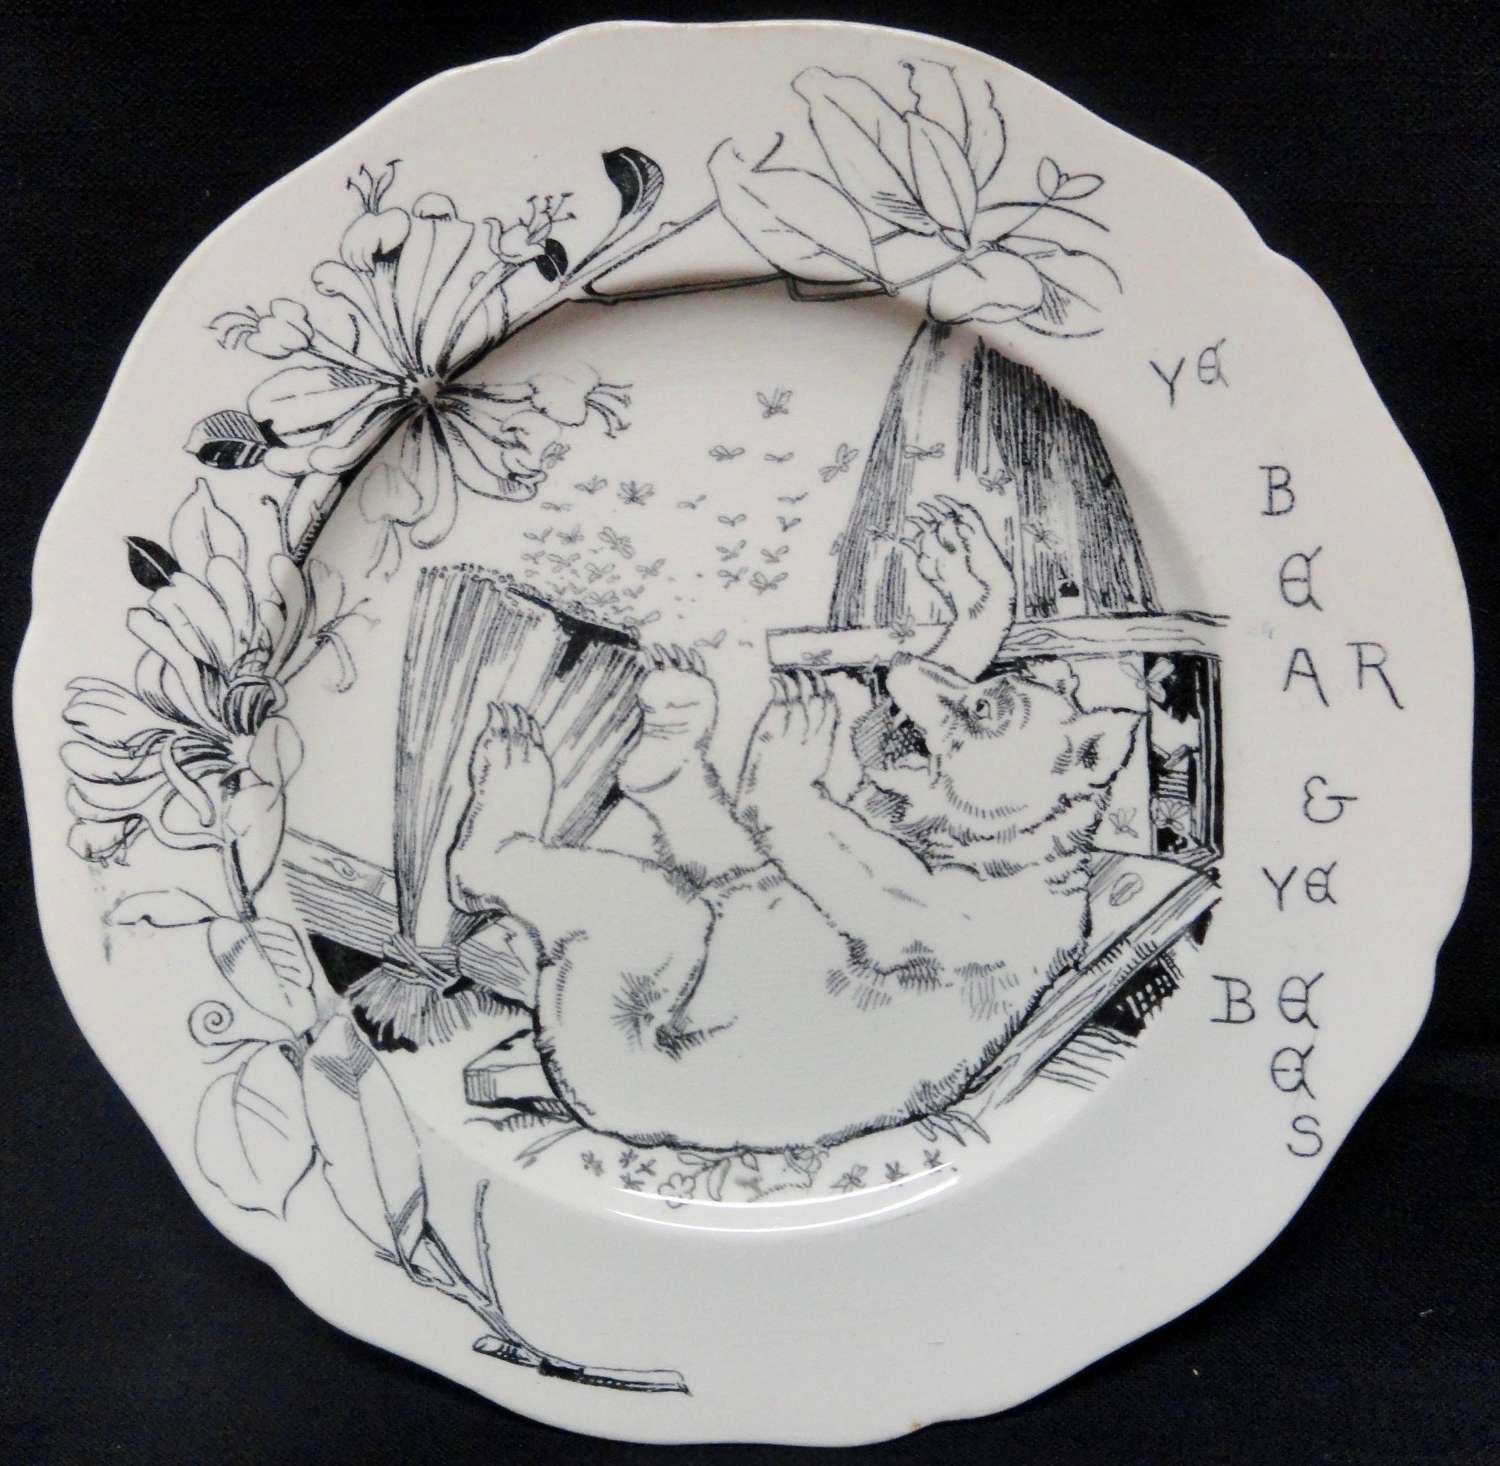 1870 Aesop’s Fables BEAR BEES Plate